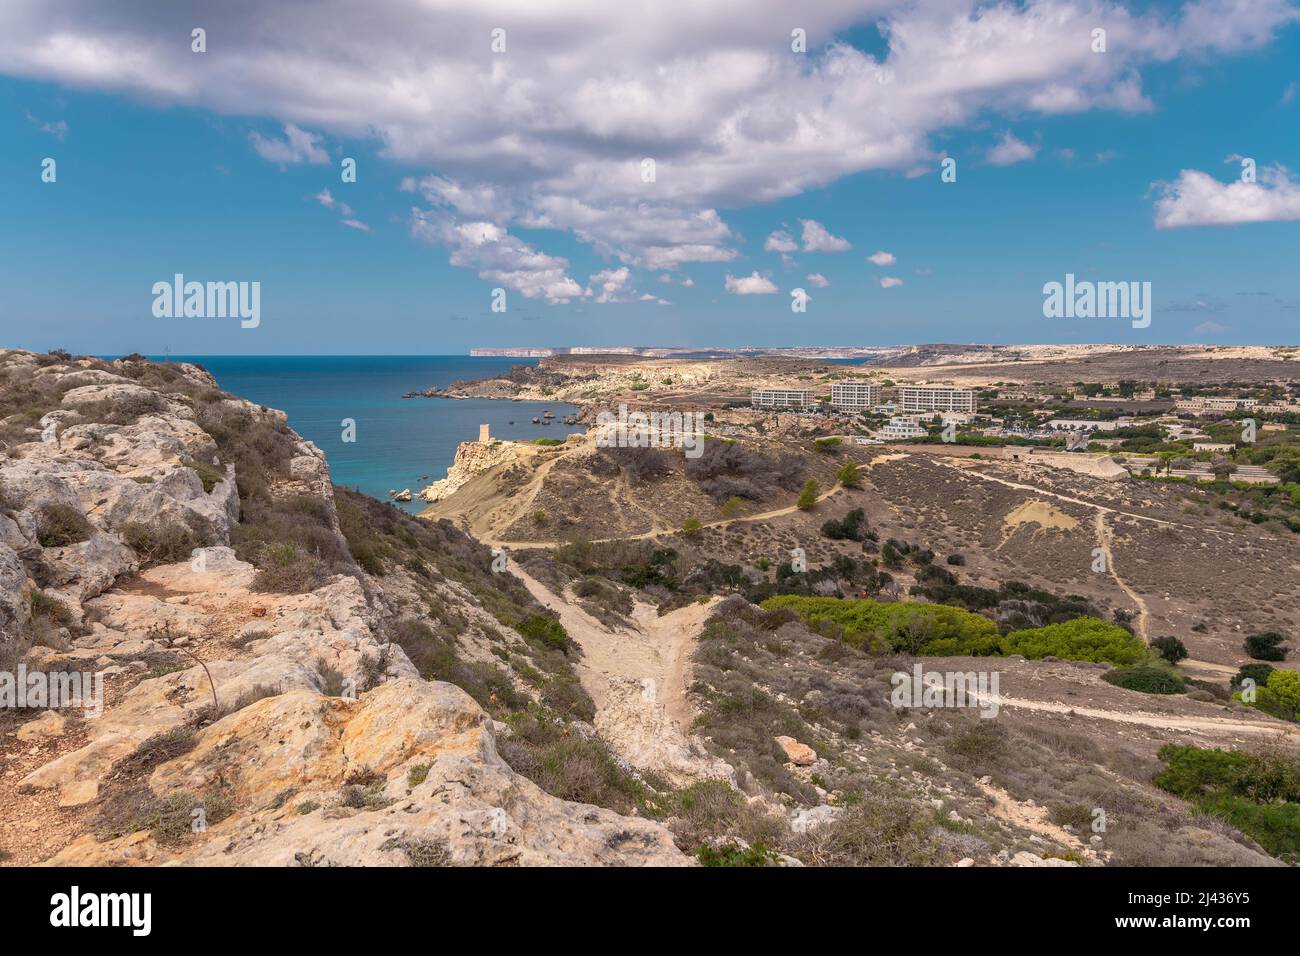 Beautiful maltese bays and cliffs surrounded by amazing blue sea Stock Photo